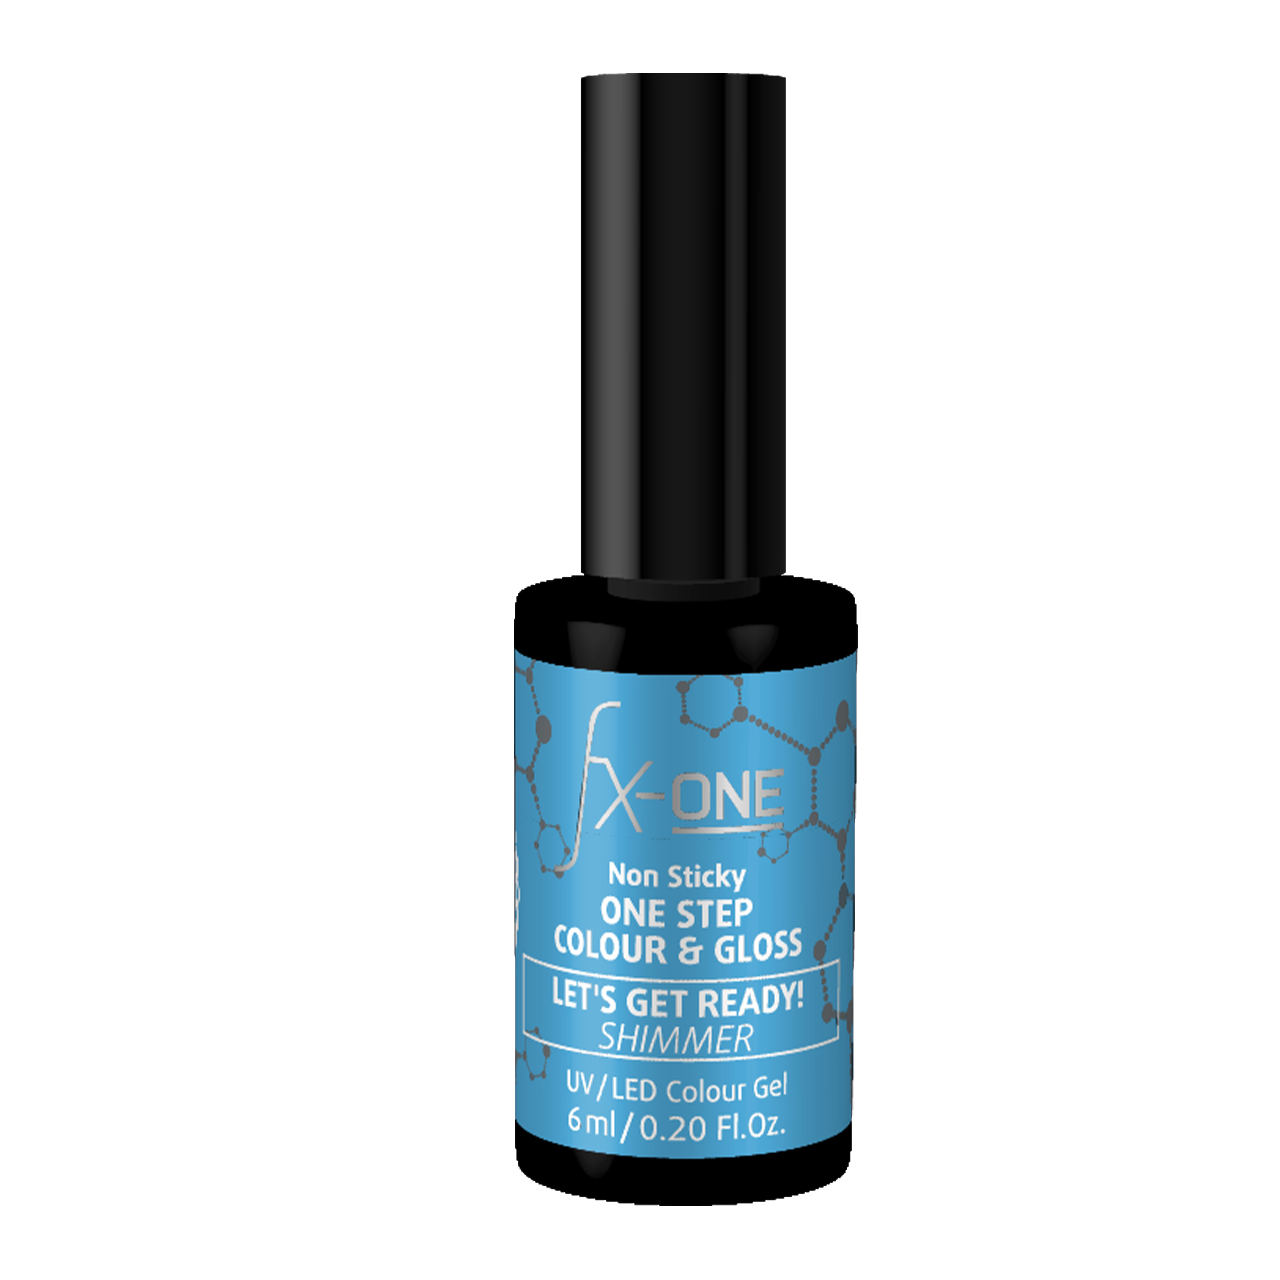 FX-ONE Colour & Gloss Let's Get Ready 6ml